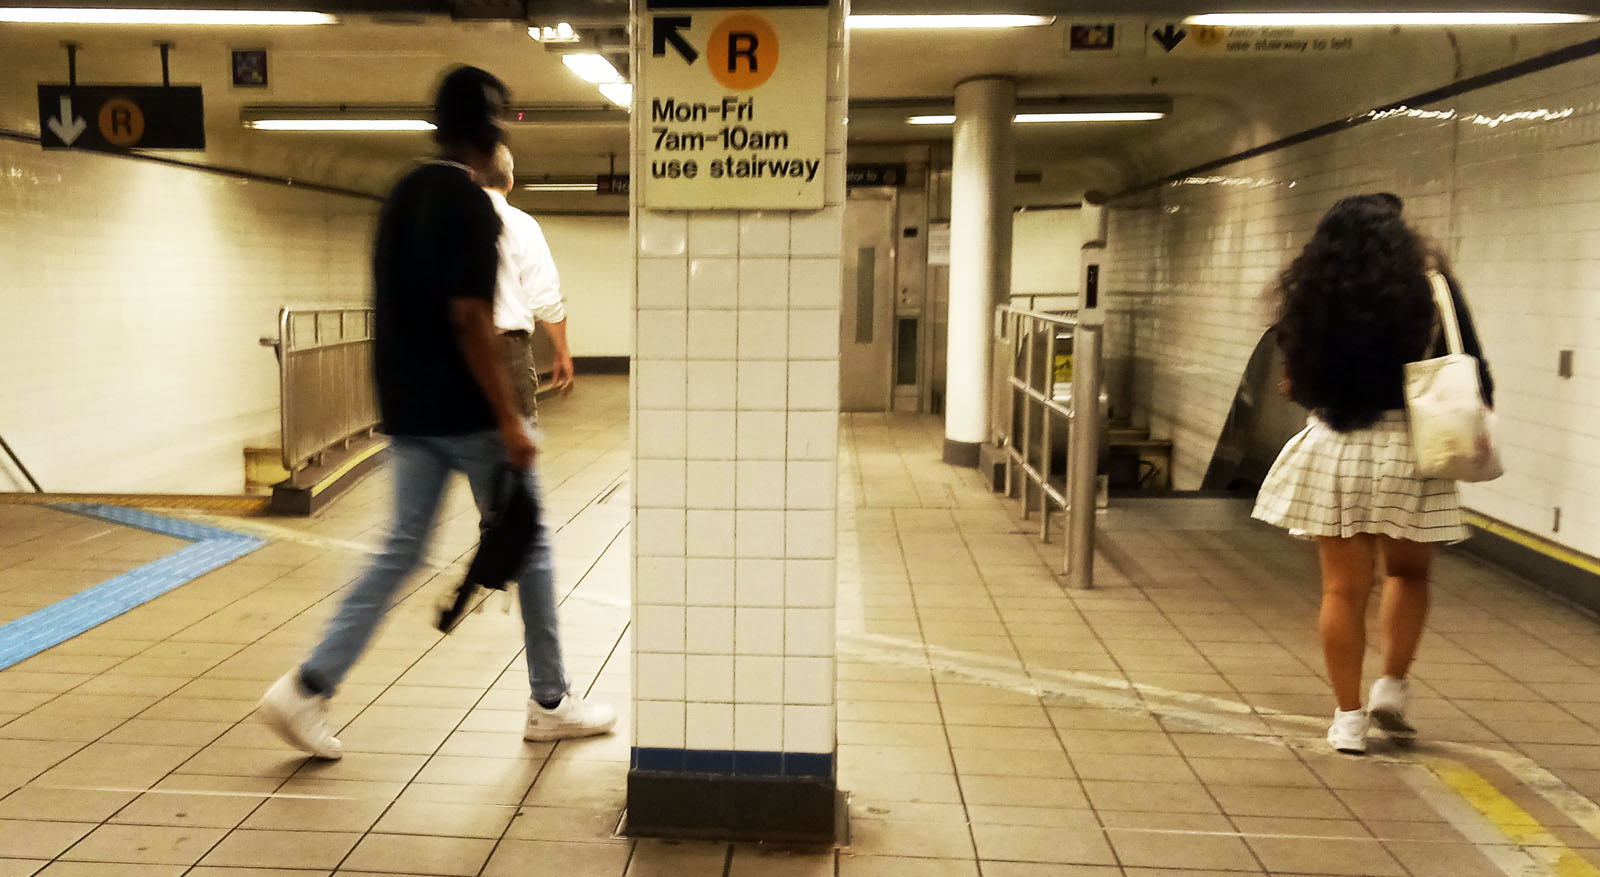 Brooklyn NY, Jay St. Metrotech subway station, Mezzanine, stairs, elevator, and escalator down to the R train